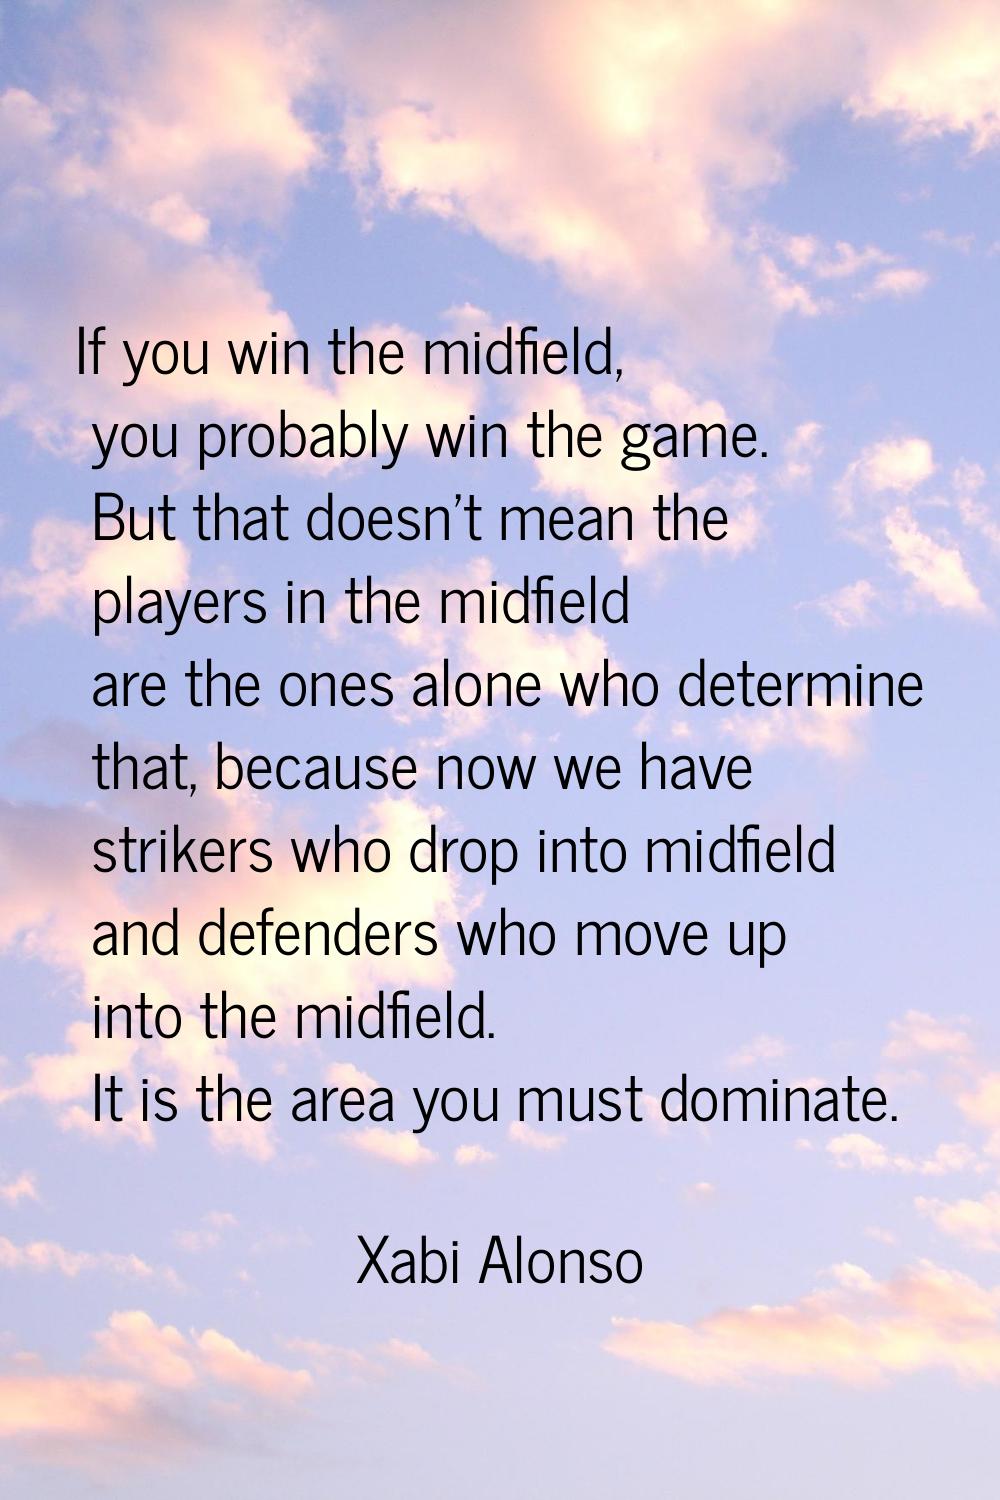 If you win the midfield, you probably win the game. But that doesn't mean the players in the midfie